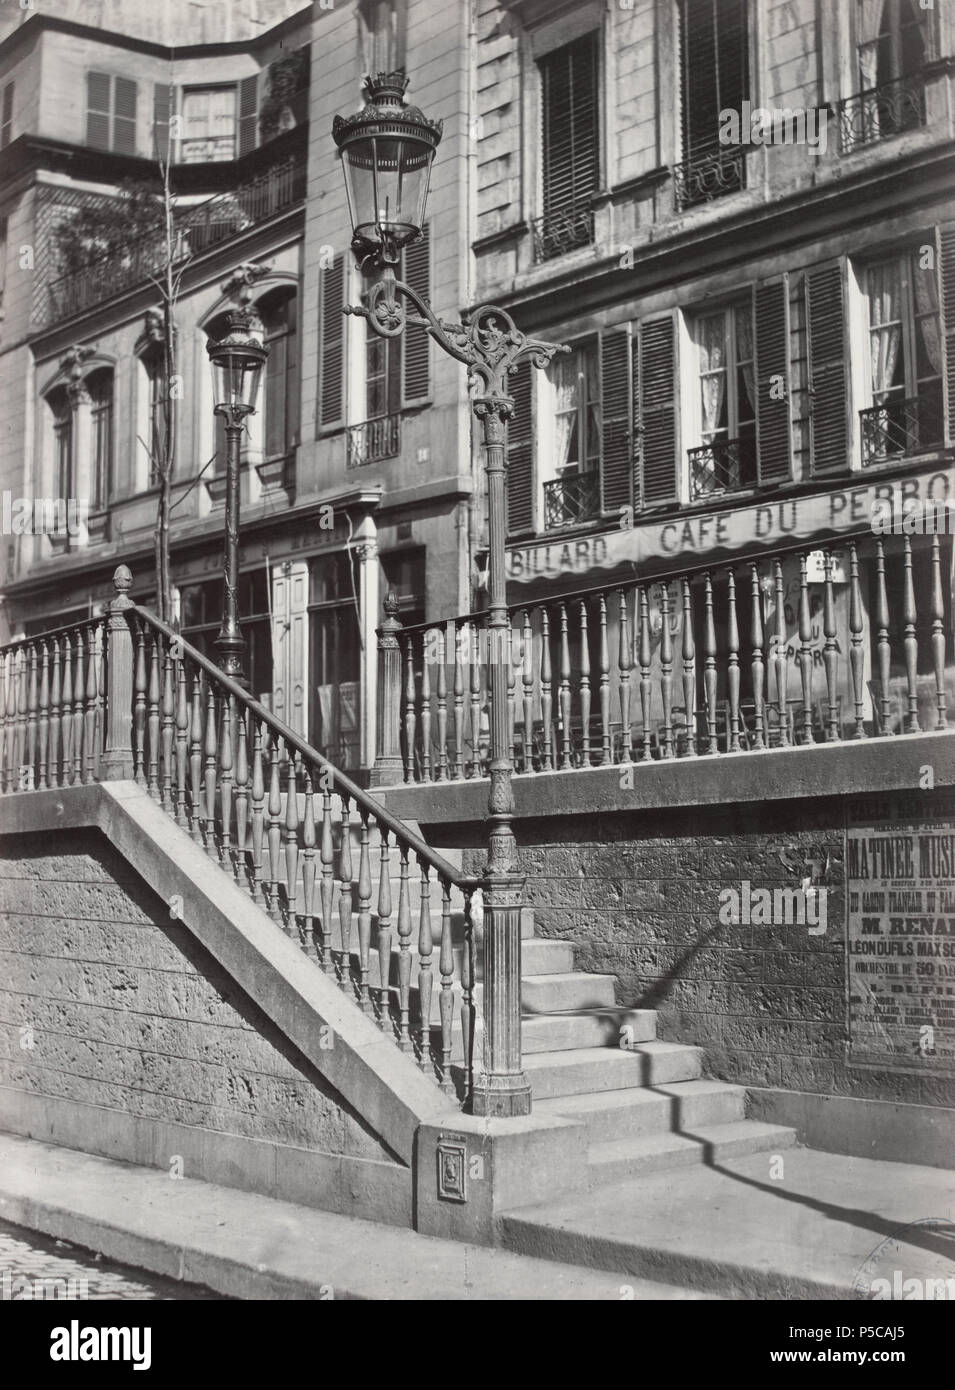 Escalier du Bd. St. Martin. no. 29. English: Single globe with iron lamp post mounted as part of the newel post of a flight of steps up to another path. 1878. N/A 327 Charles Marville, Escalier du boulevard Saint-Martin, 1878 Stock Photo